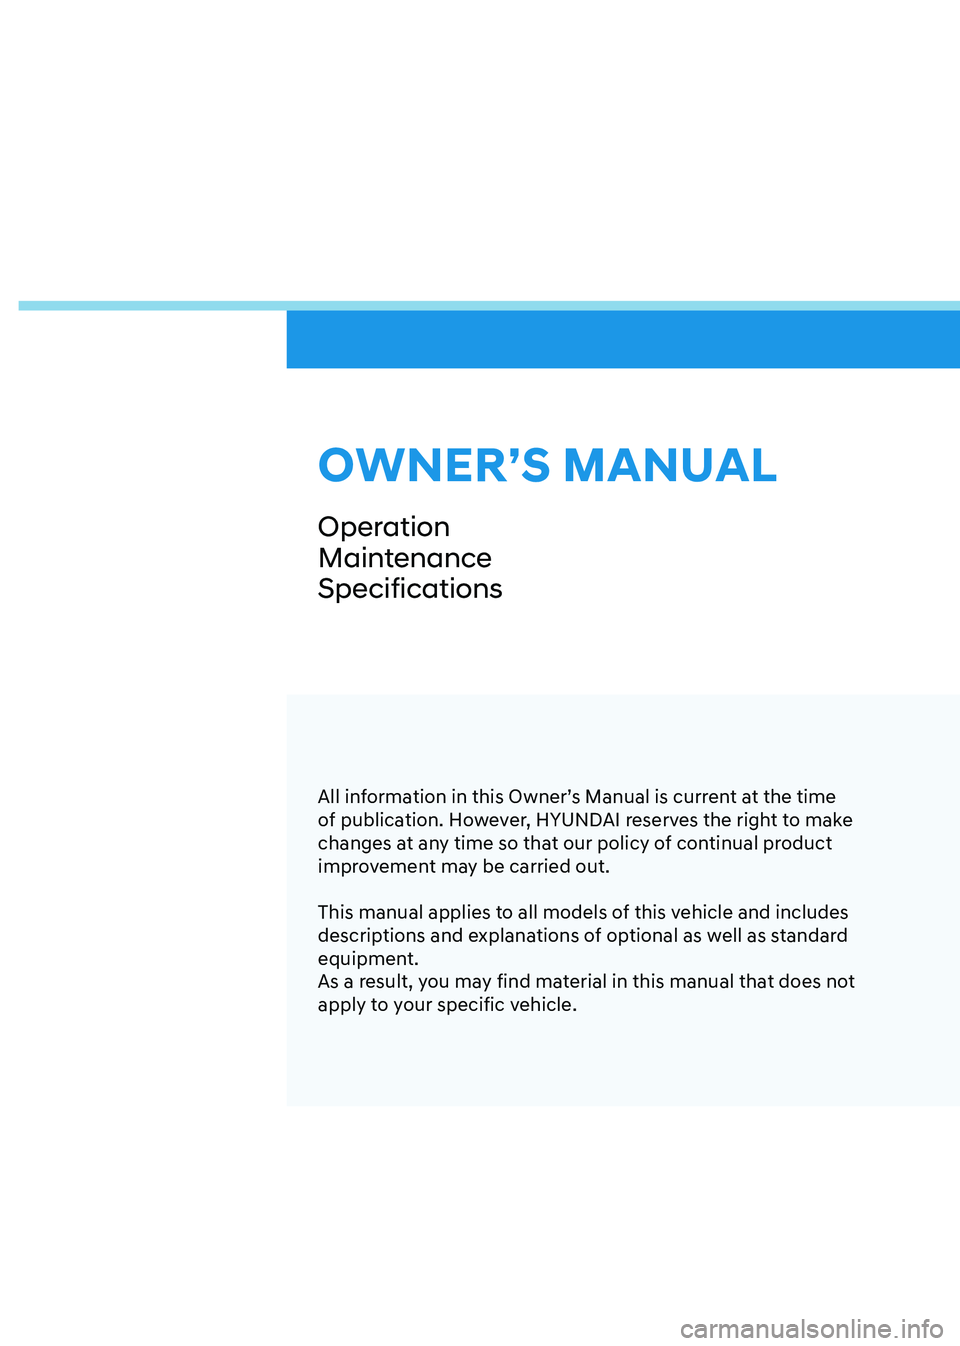 HYUNDAI KONA EV 2022  Owners Manual All information in this Owner’s Manual is current at the time  
of publication. However, HYUNDAI reserves the right to make 
changes at any time so that our policy of continual product 
improvement 